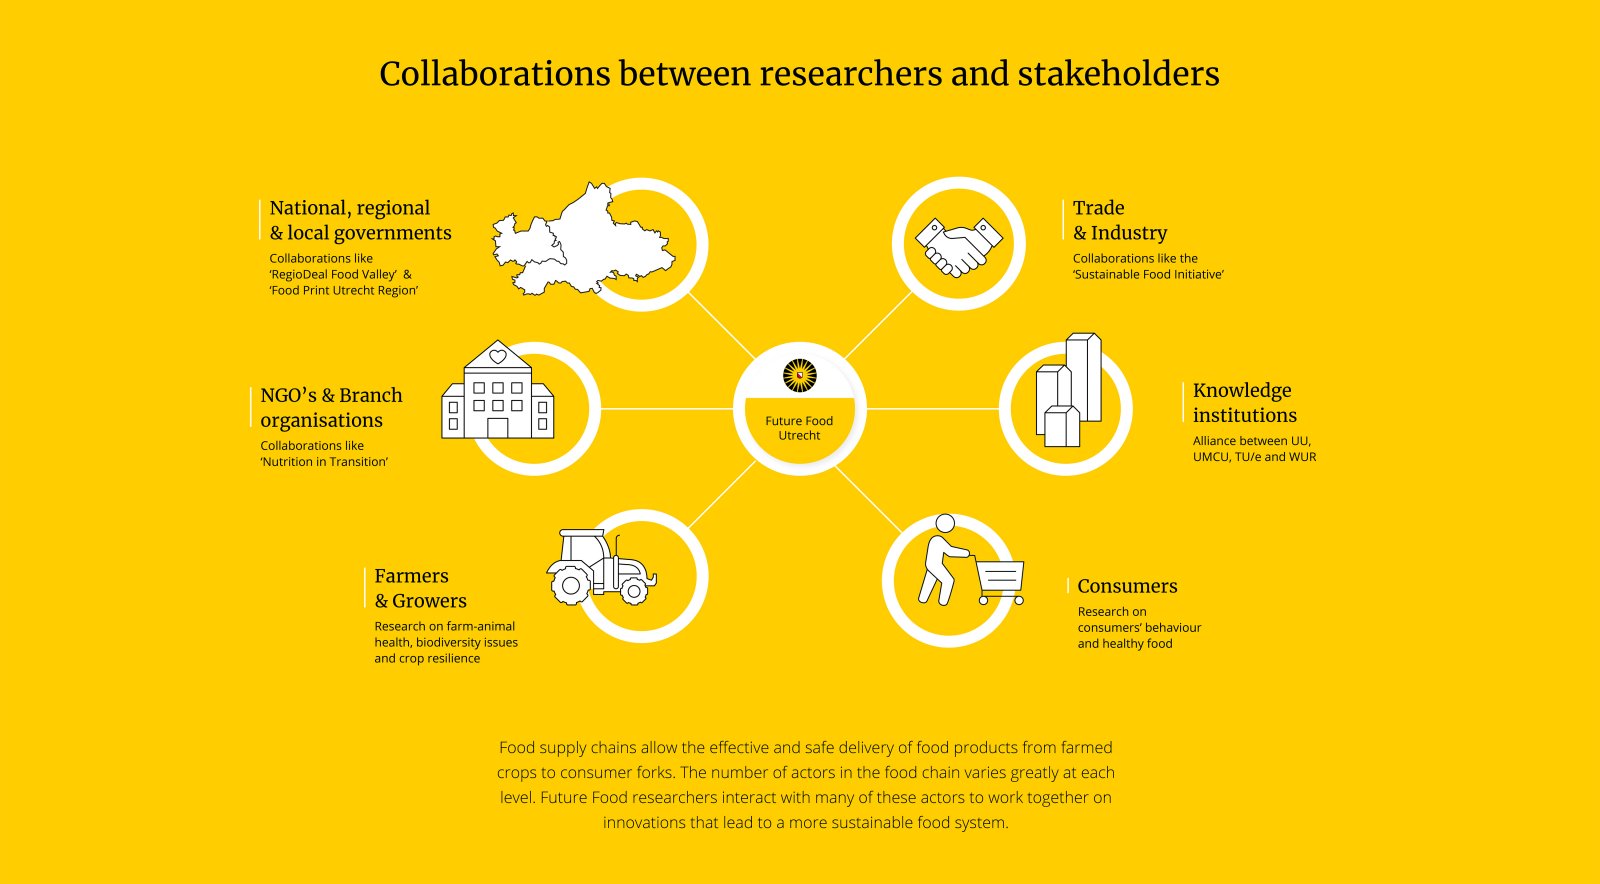 Collaborations between researchers and stakeholders. See text under heading "Collaborations between researchers and stakeholders"